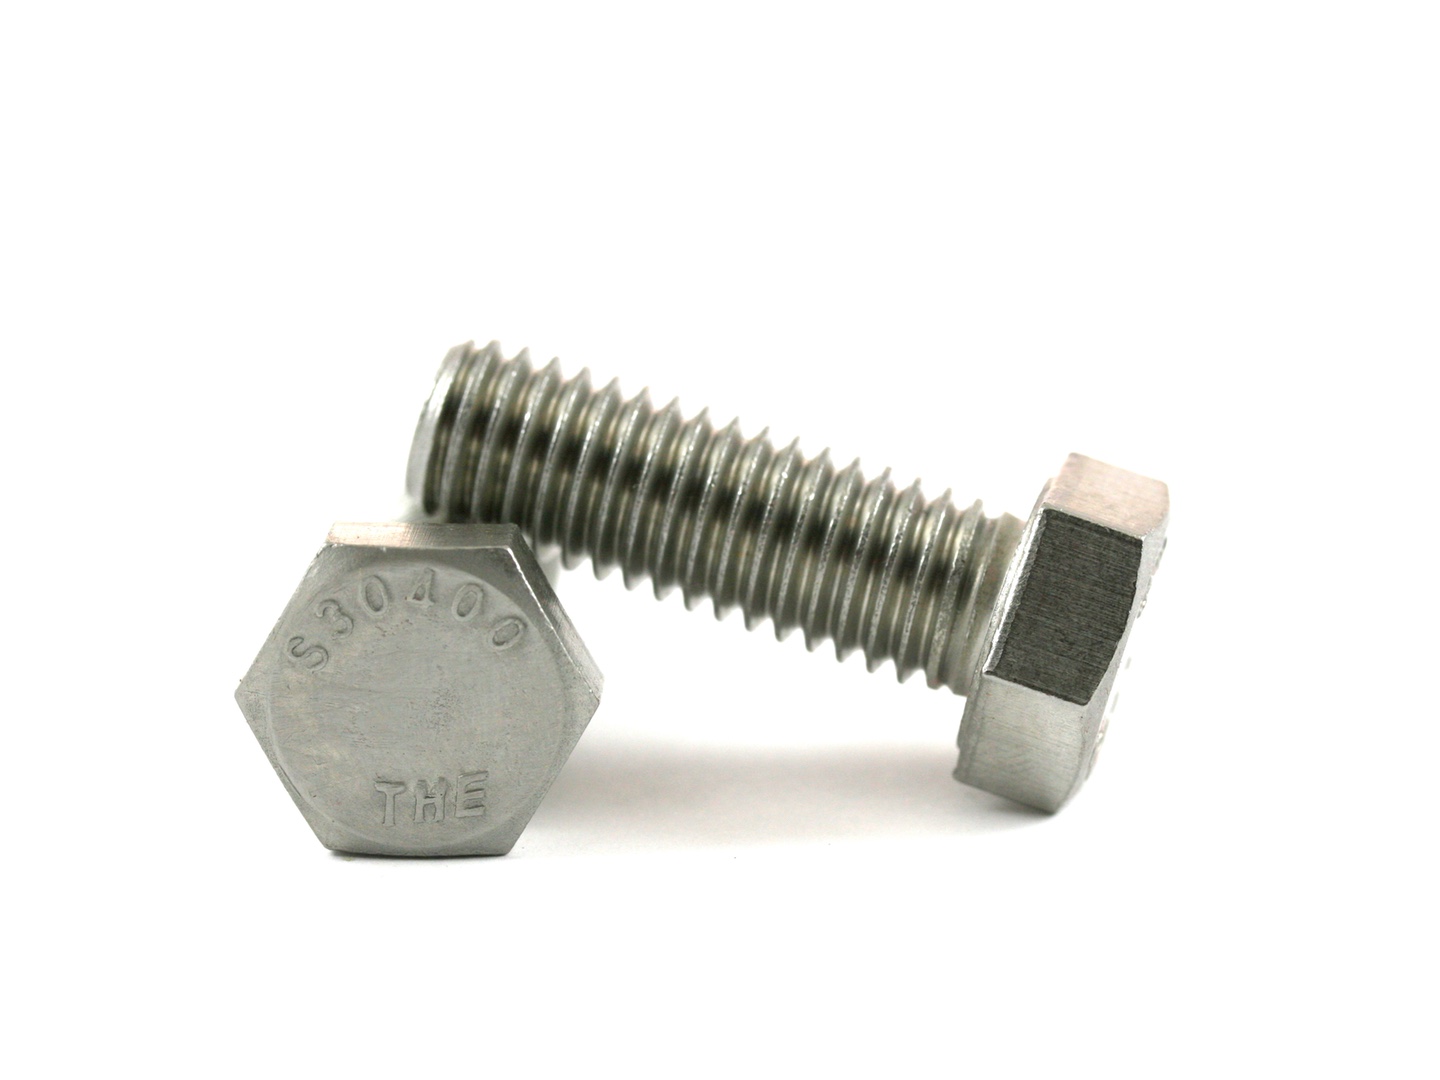 9# 8.2# & 12 SS Stainless HEX CAP BOLTS Fasteners 3/4"-10 x 5" BULK LOTS 11 